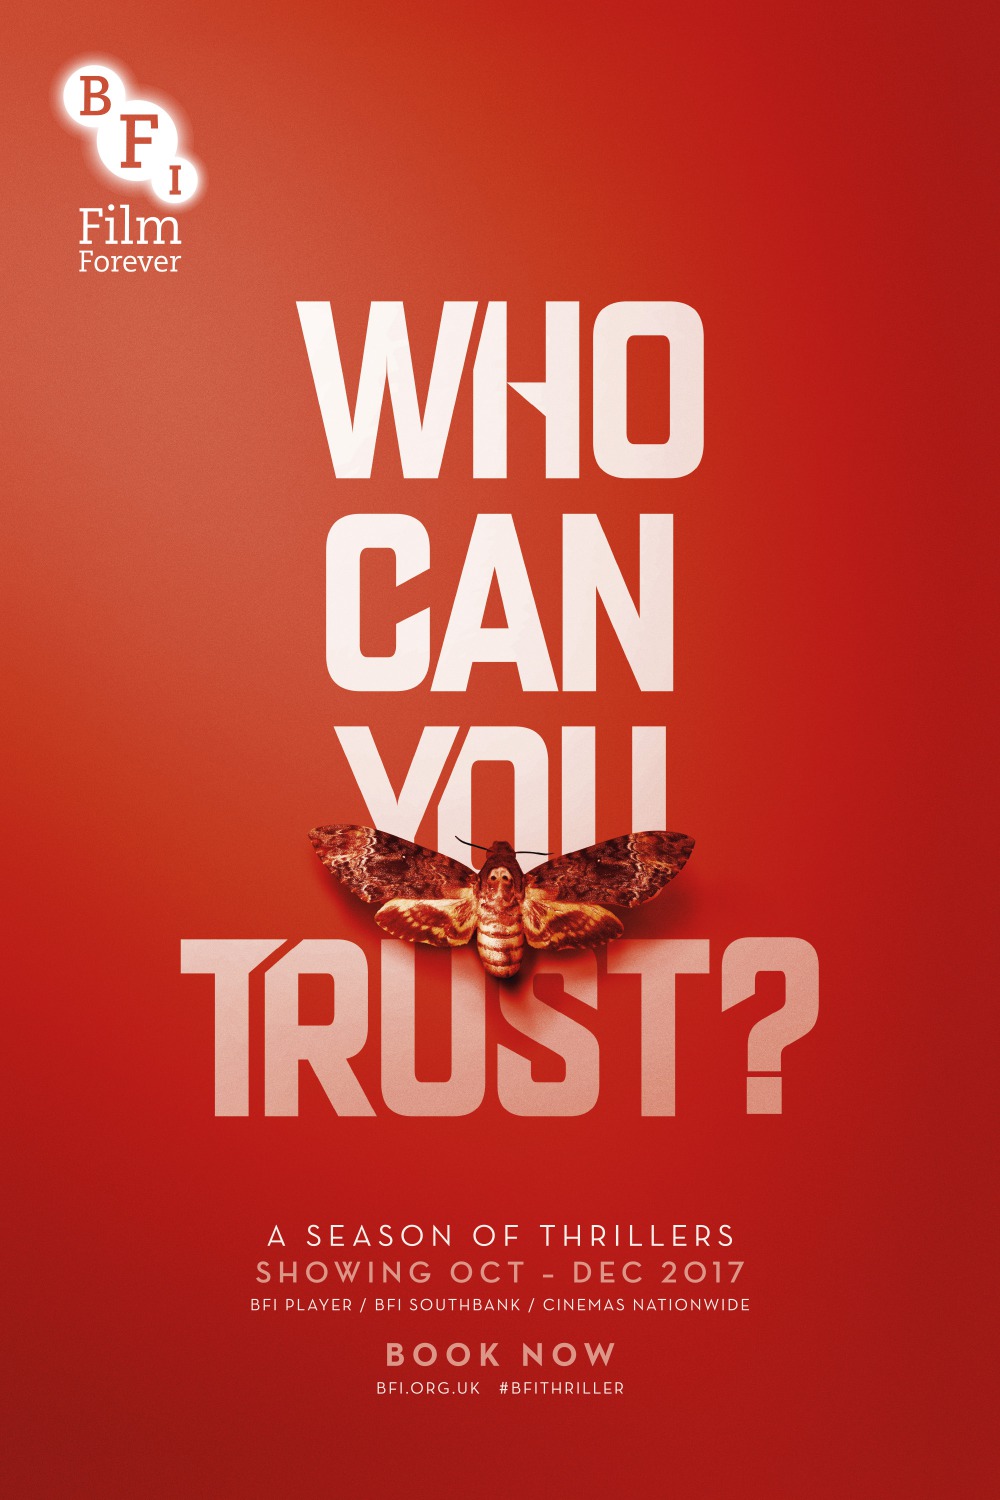 Extra Large TV Poster Image for BFI Film: A Season of Thrillers (#1 of 5)